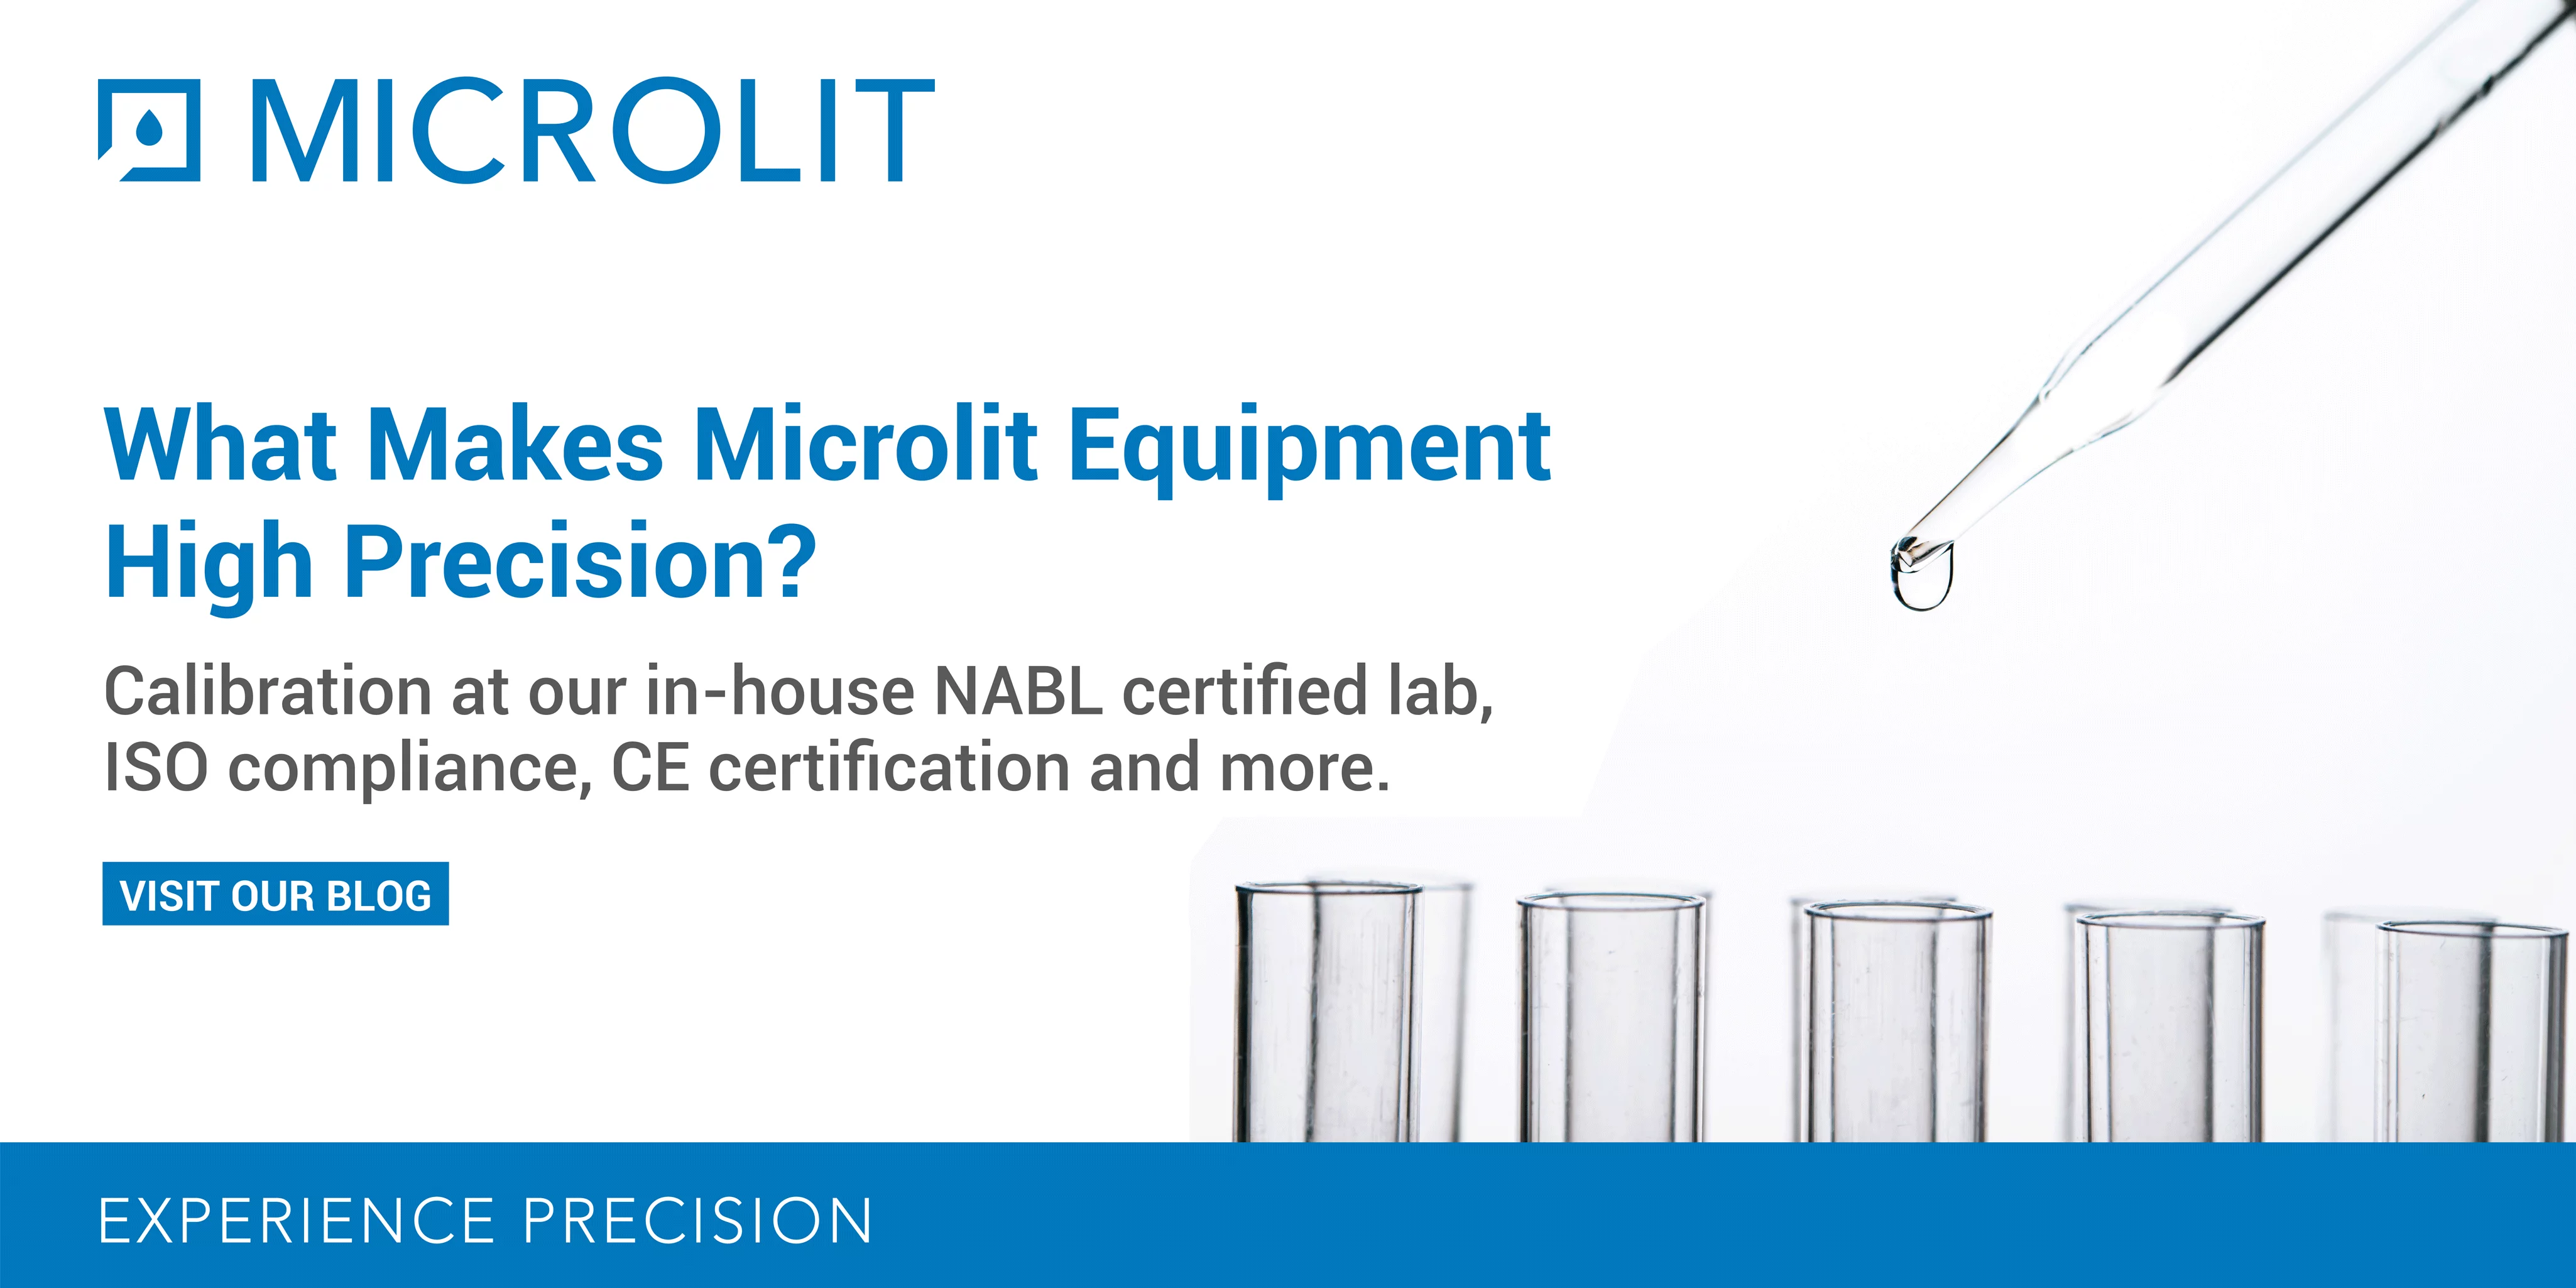 How We Ensure High Levels of Precision in Our Lab Equipment